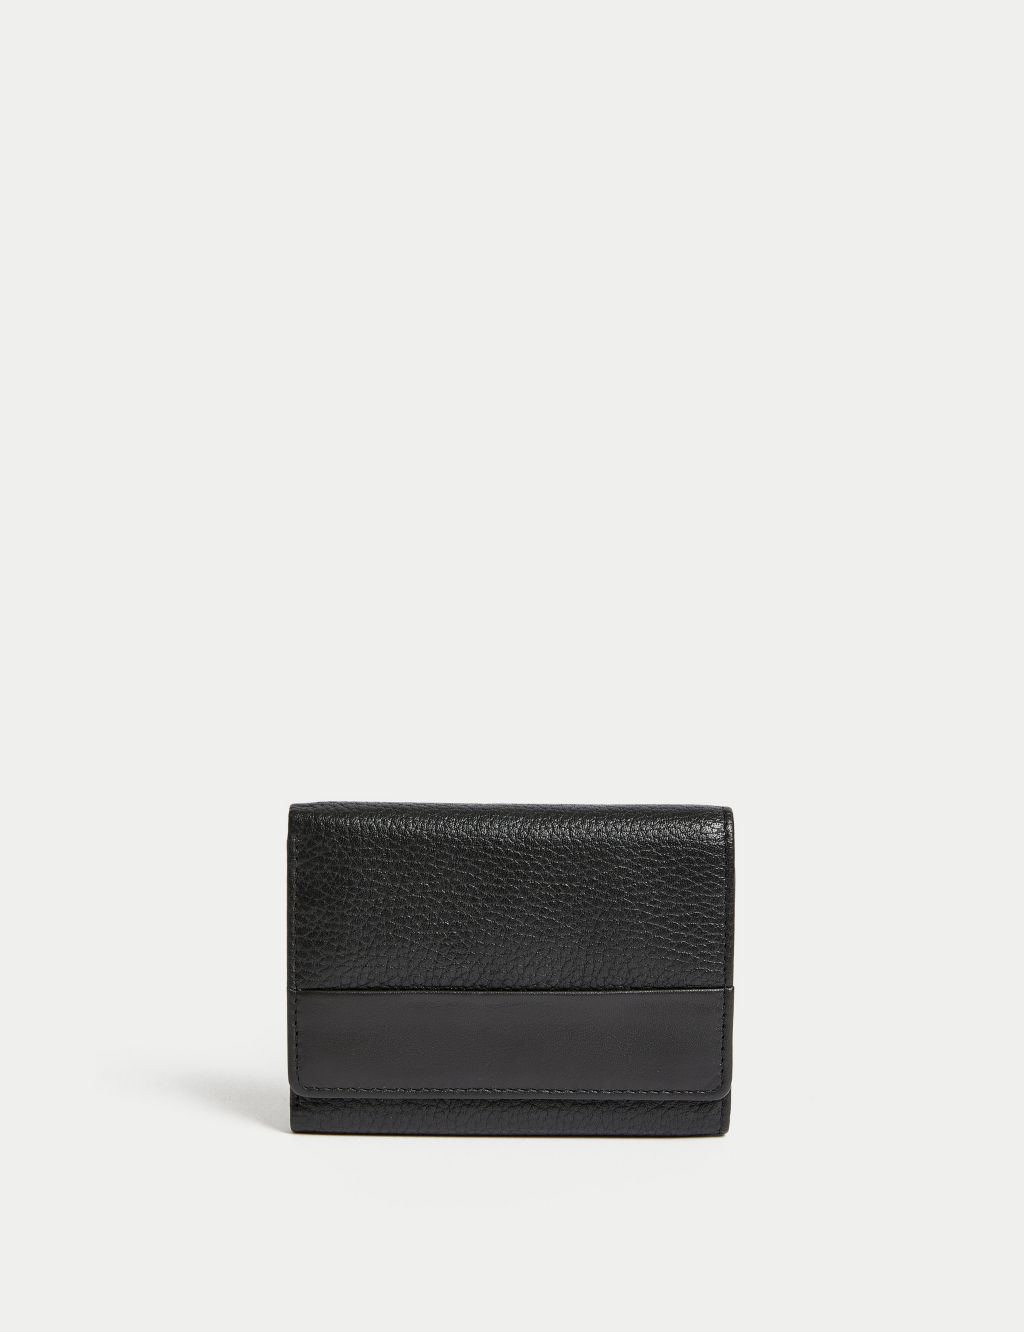 Leather Tri-fold Wallet image 1